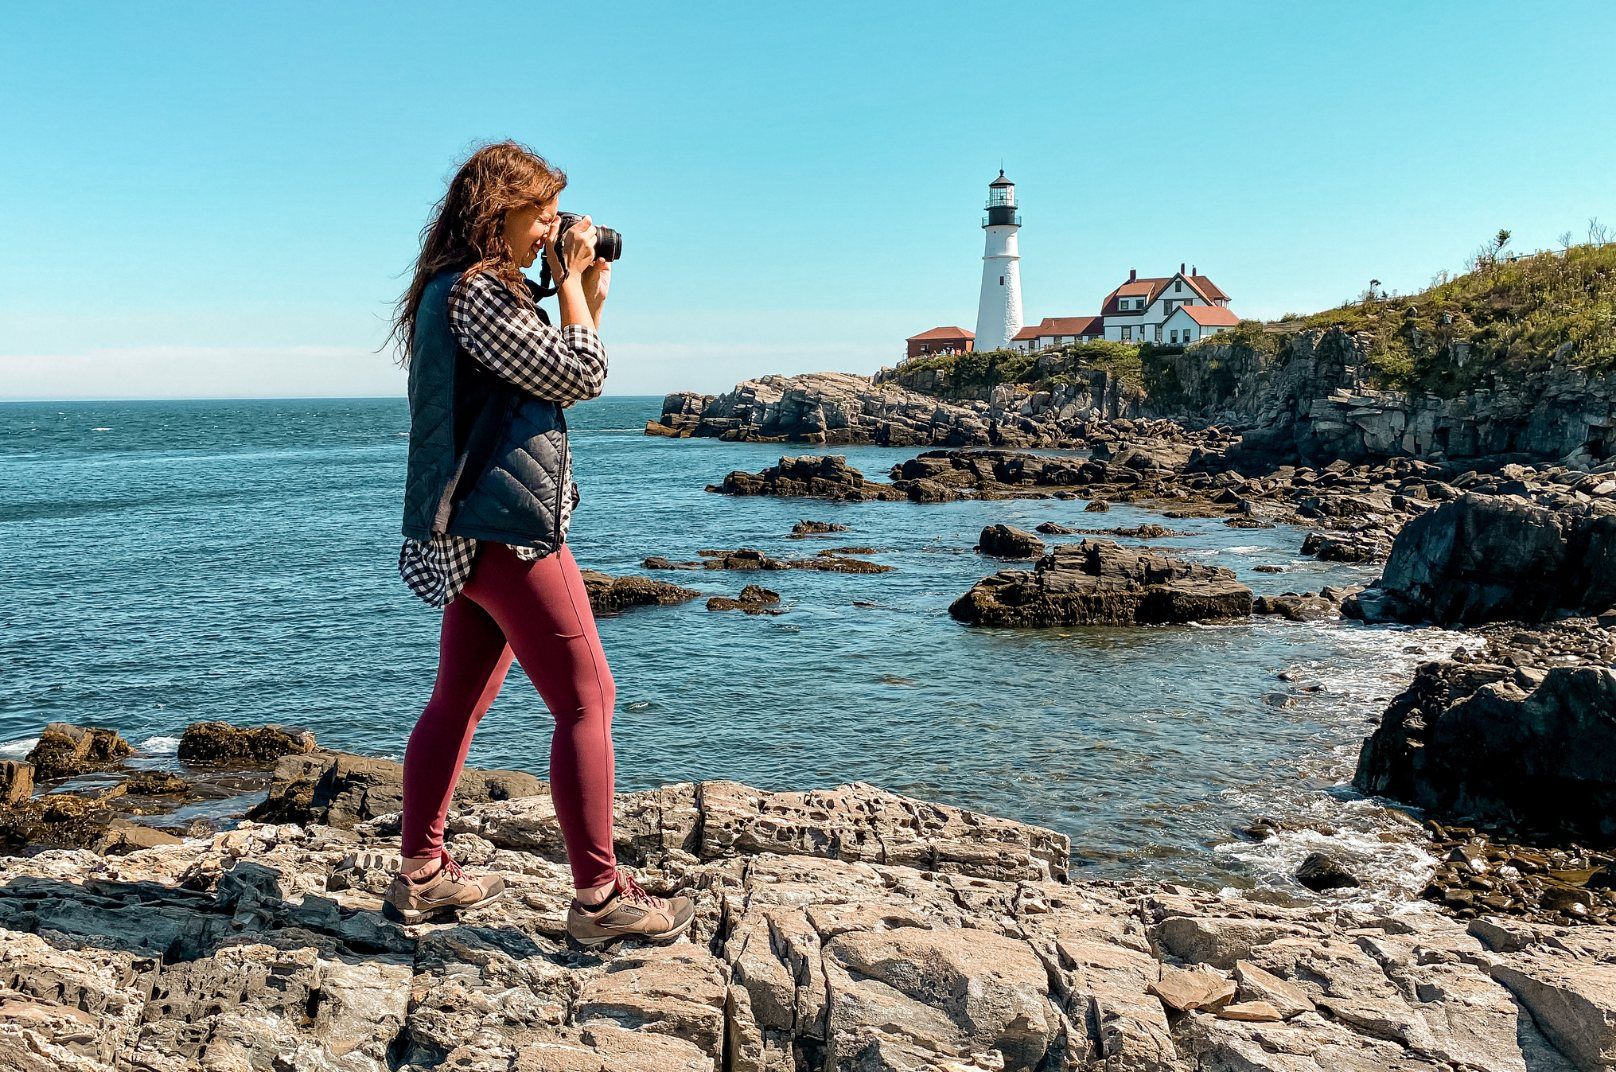 How to take photos while traveling solo